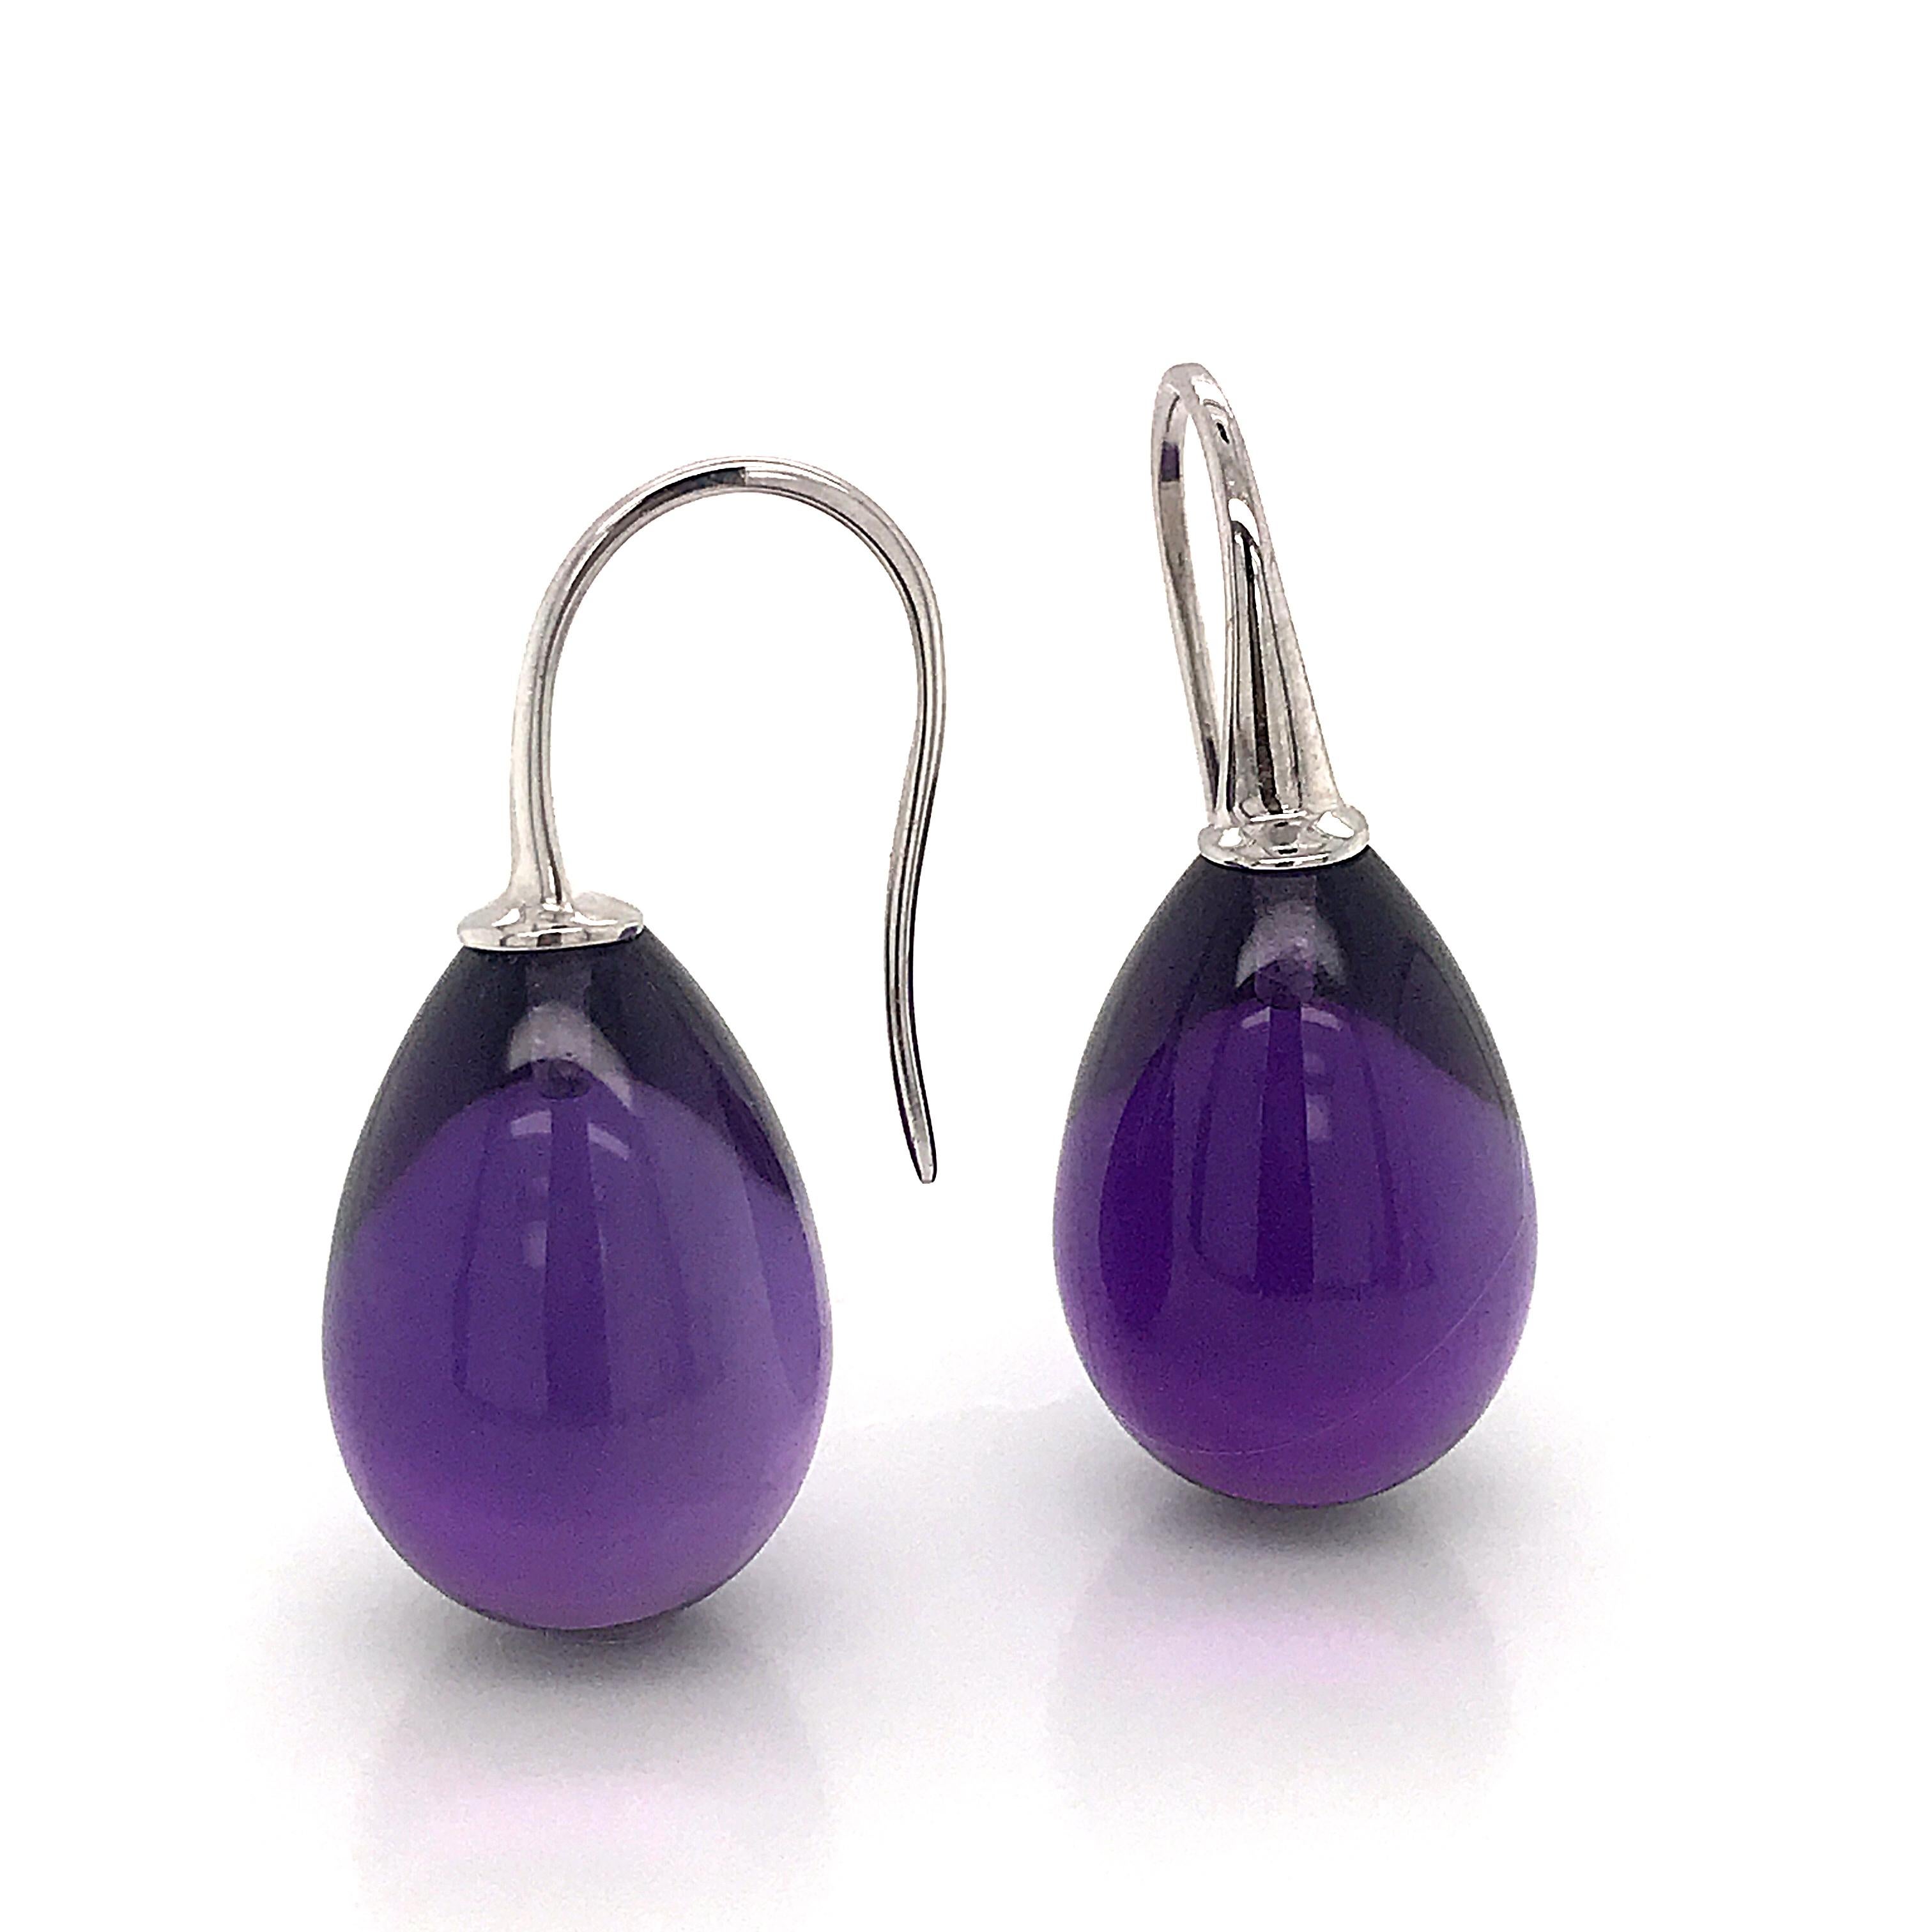 Hydro Amethyst With White Gold Drop Earrings 
Hydro Amethyst 
White Gold 18 k Weight / 2 Grams 
